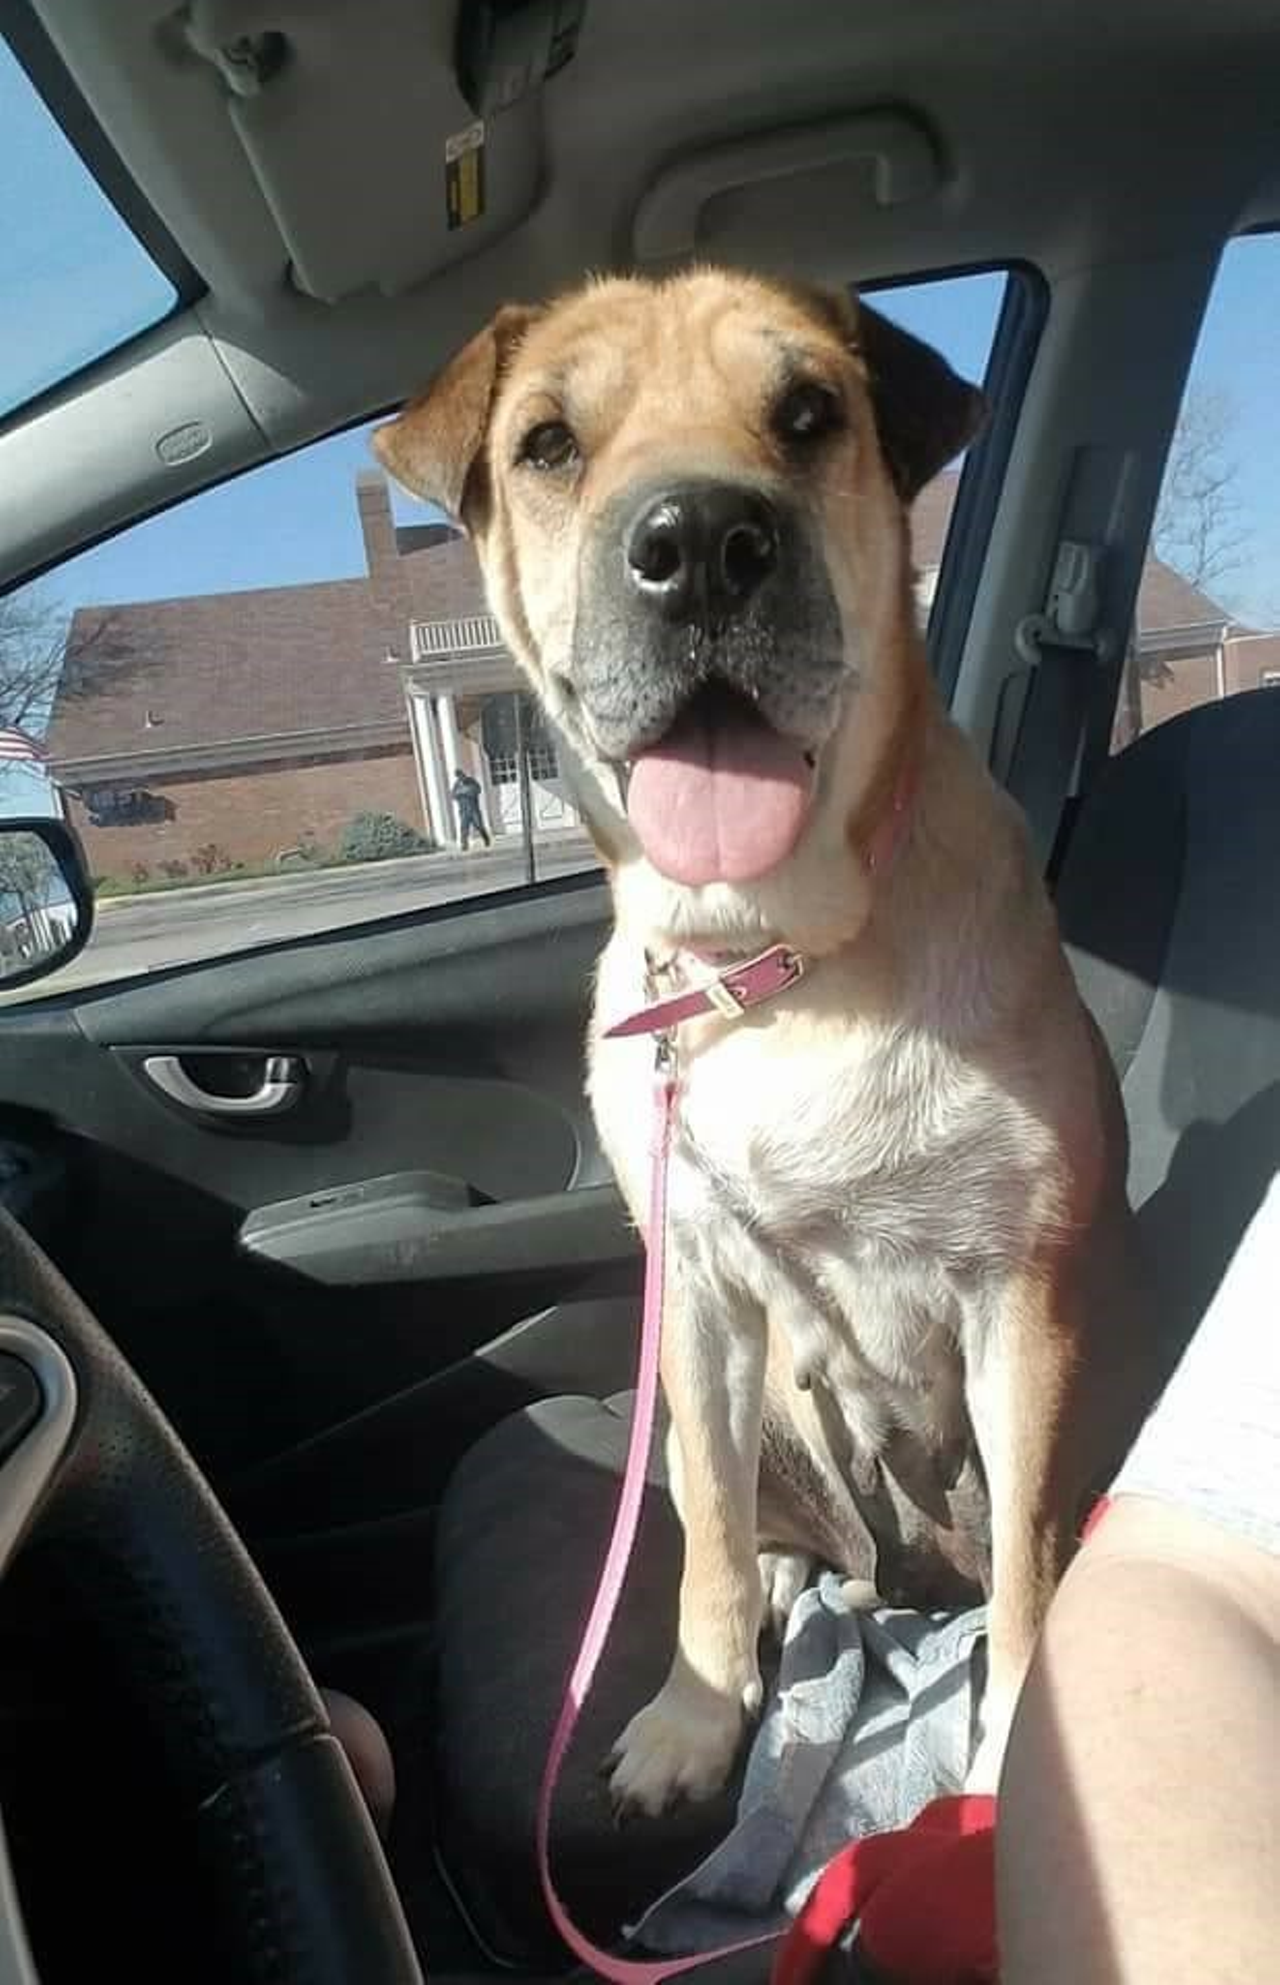 Name: Spice | Breed: Yellow Lab Mix | Age: 5 Years old | Sex: Female | Rescue: HART Cincinnati